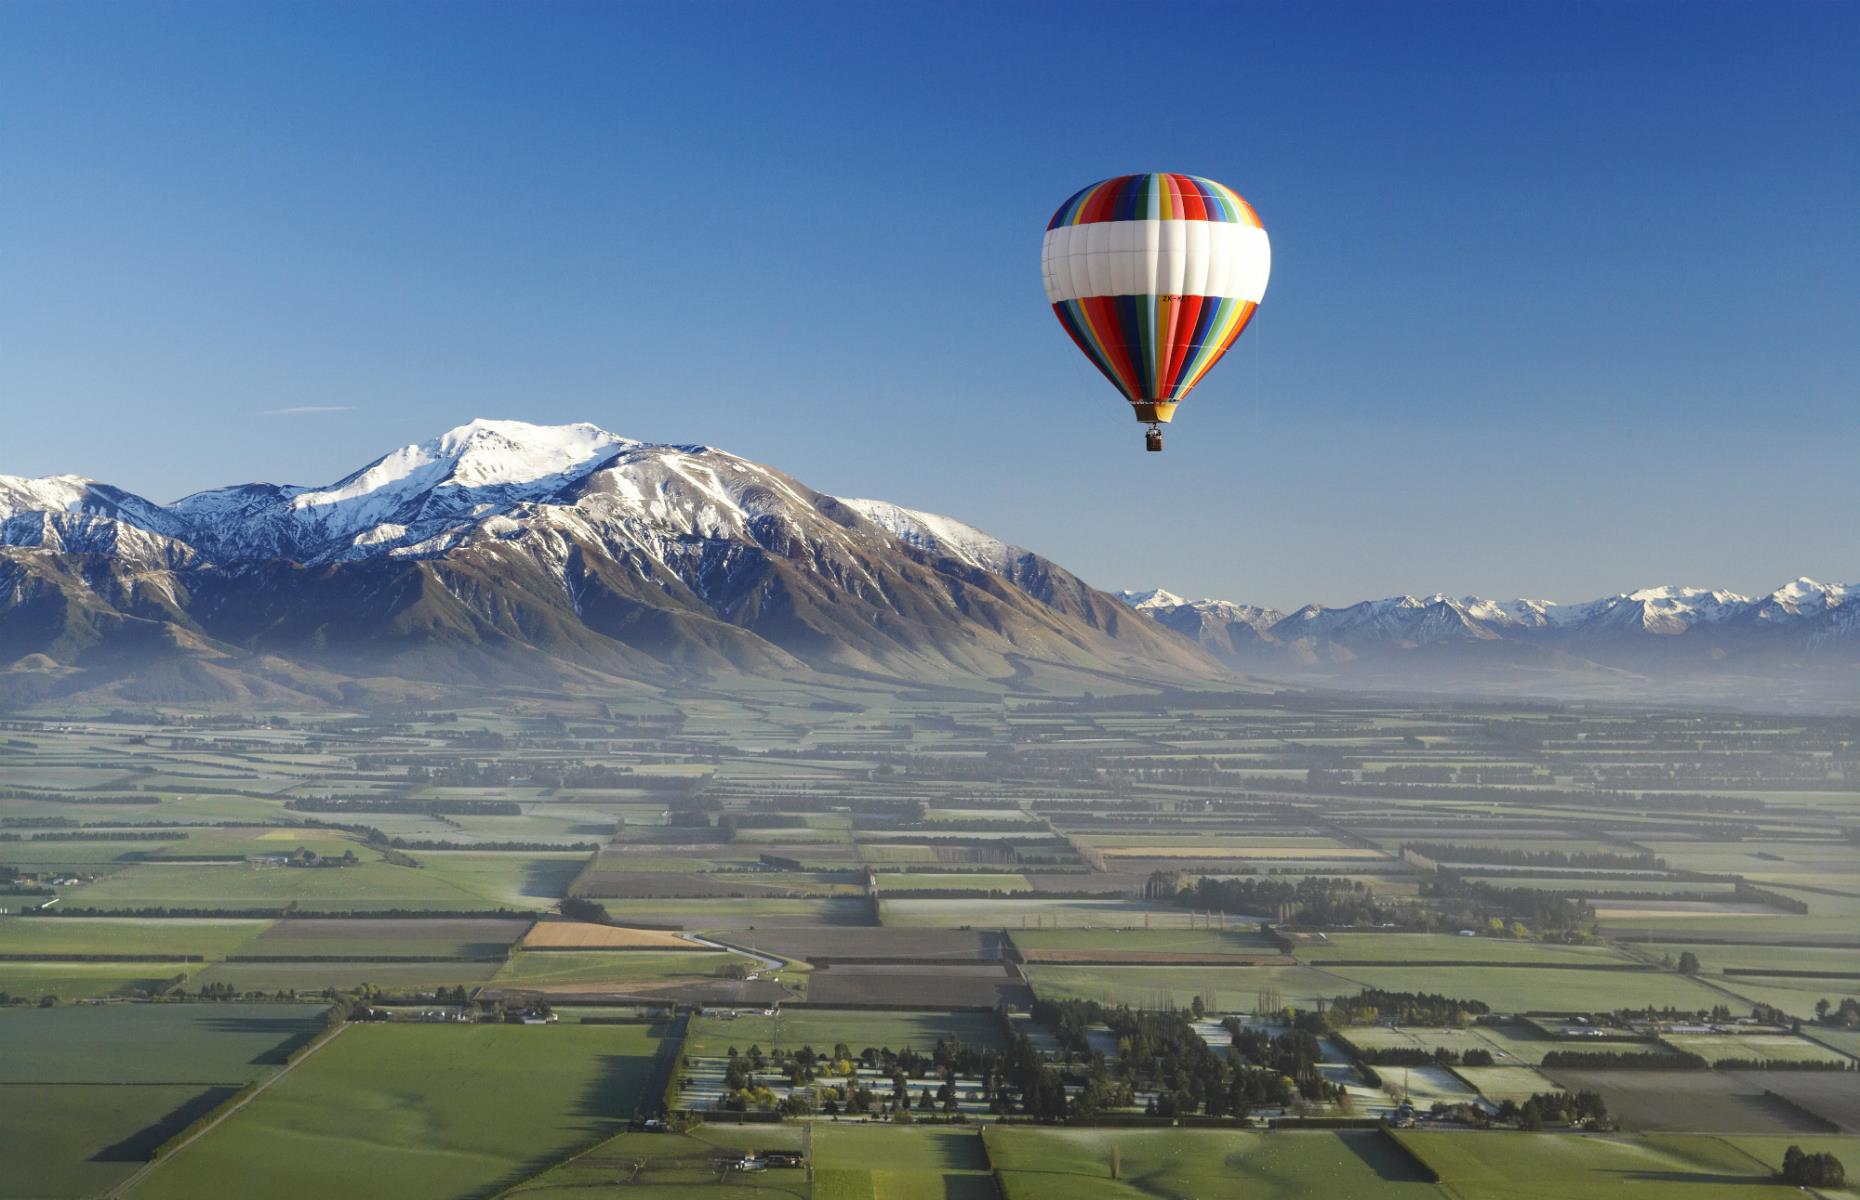 <p>Floating over the panoramic Canterbury Plains landscape is a never-to-be-forgotten experience. Hot air ballooning here is at its most magical and peaceful at sunrise. <a href="https://ballooningcanterbury.com/">Ballooning Canterbury</a> offers hour-long flights and balloon fiestas where you have the opportunity to float among other balloons.</p>  <p><strong><a href="https://www.loveexploring.com/galleries/81915/the-worlds-most-incredible-hot-air-balloon-rides?page=1">The world's most incredible hot-air balloon rides</a></strong></p>